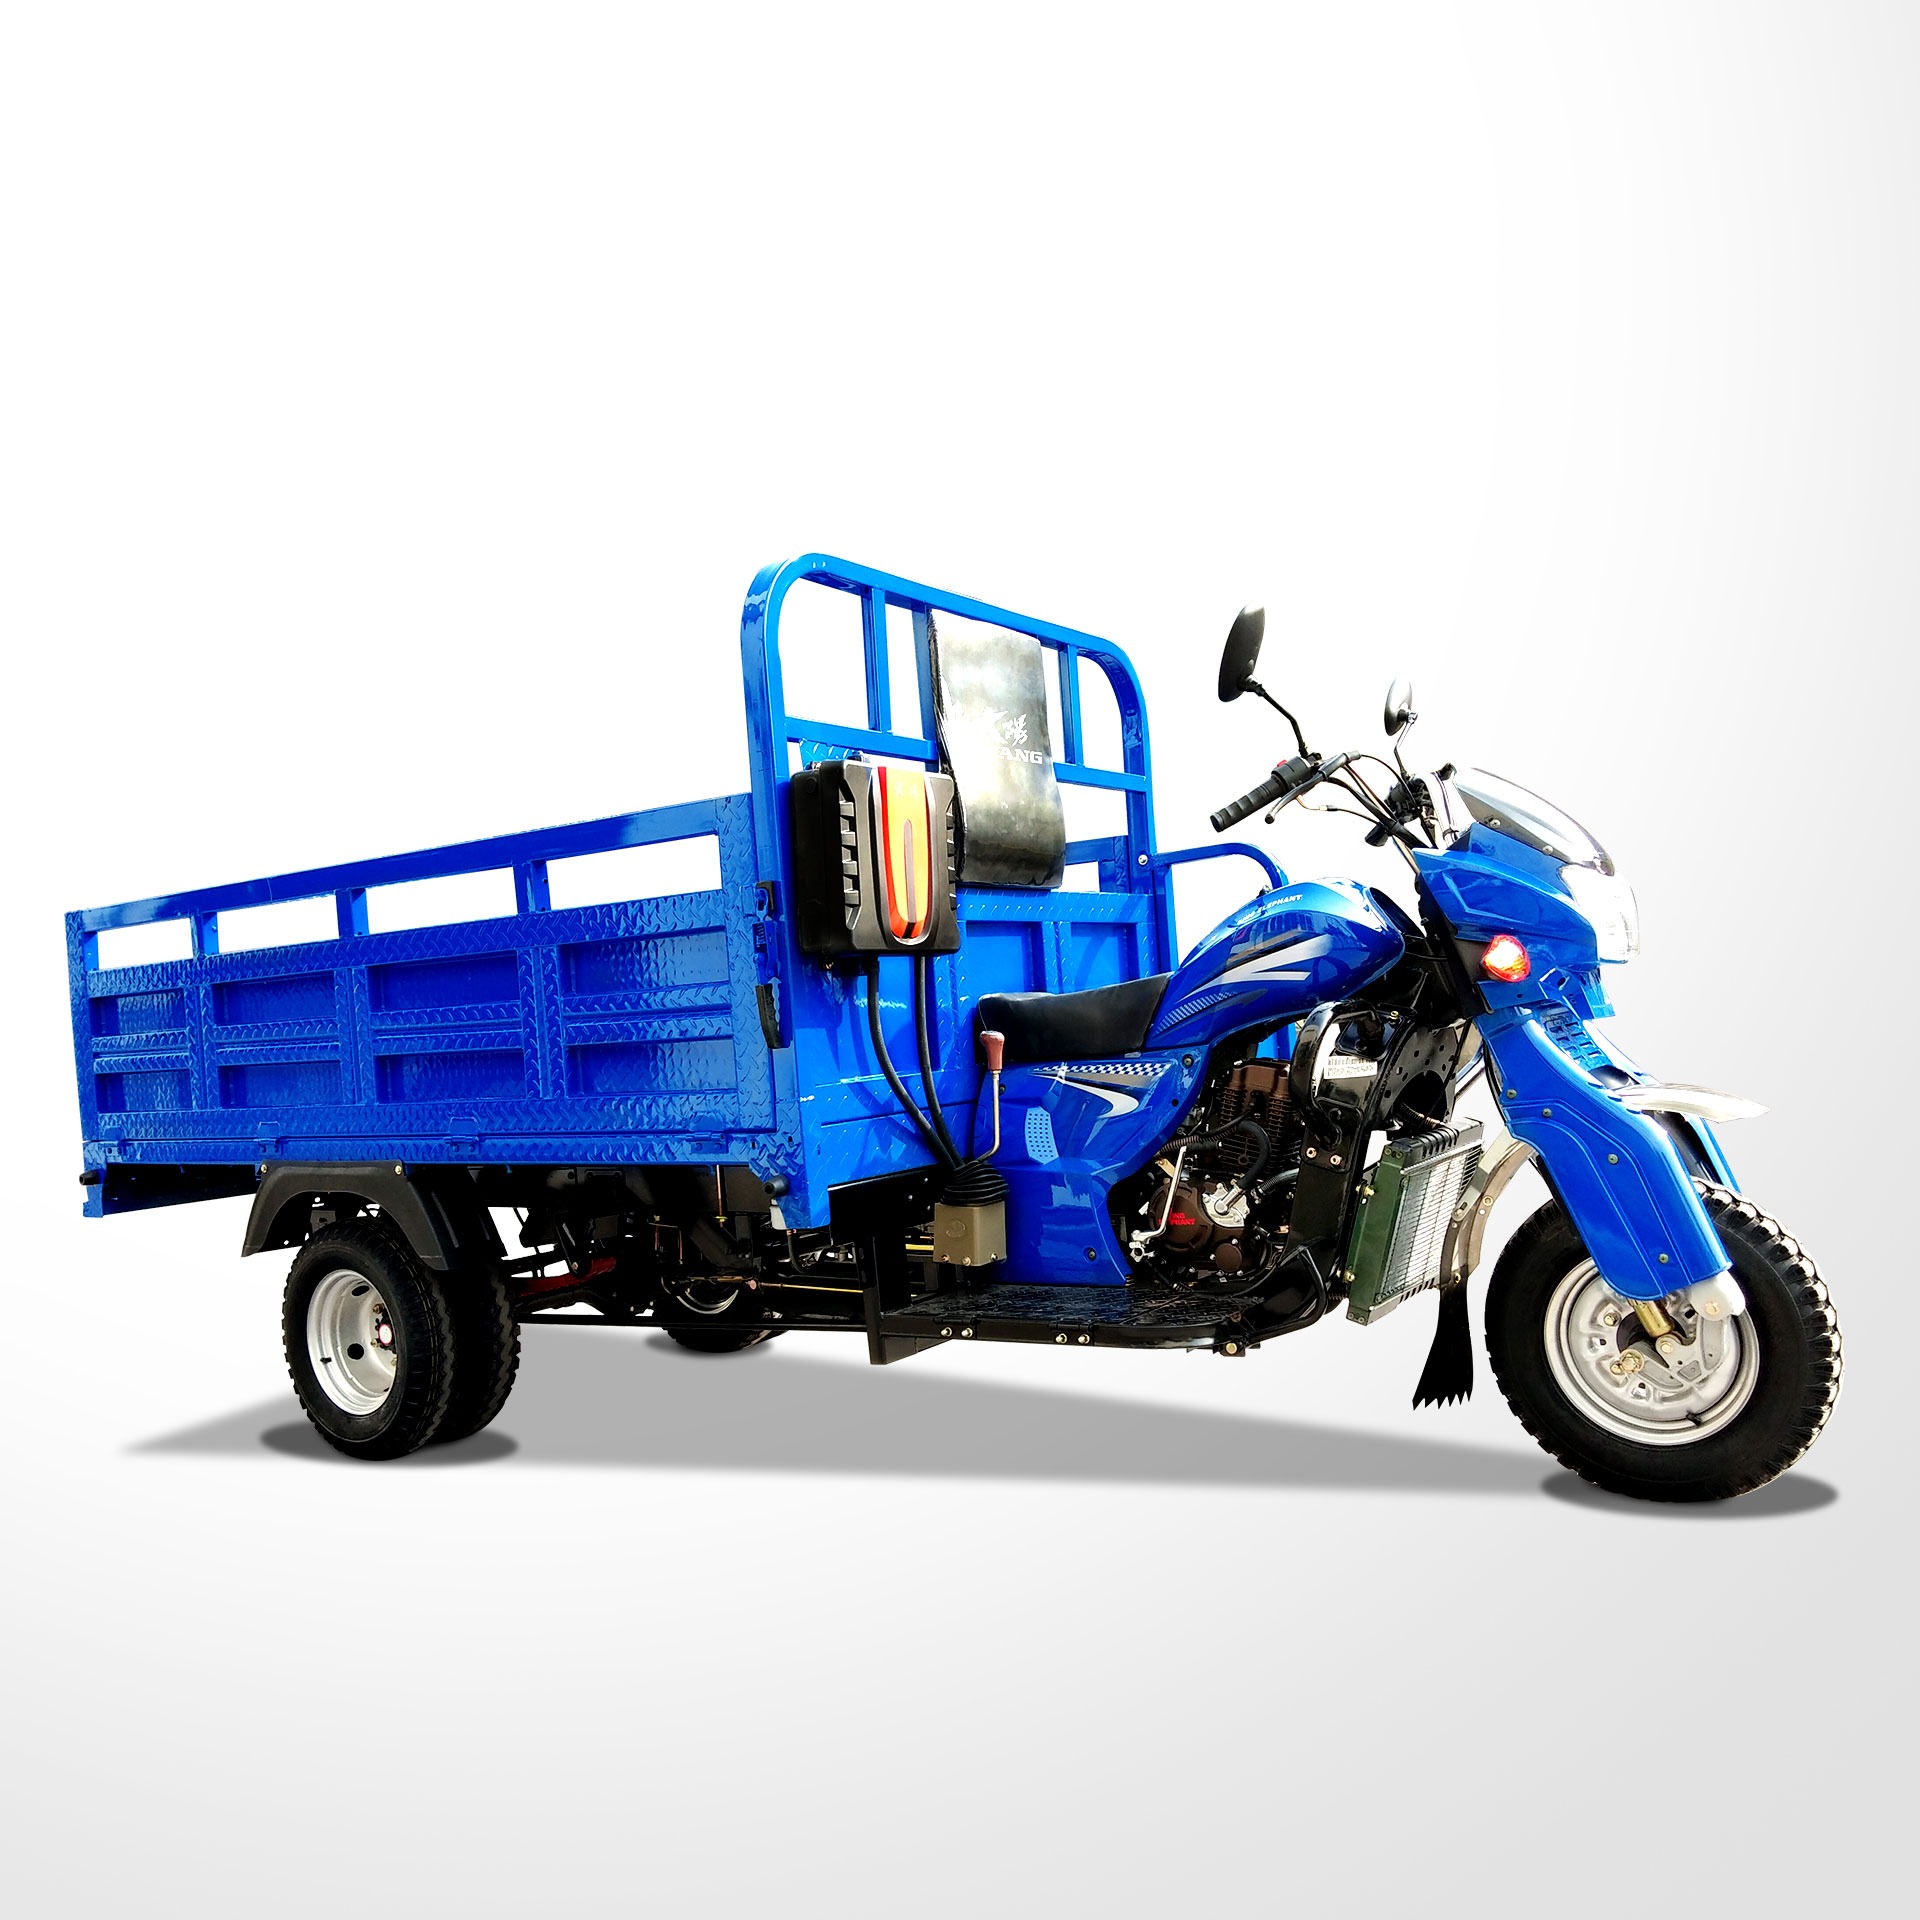 Top brand hot selling tanzania motor tricycle with cargo boxmanufacturers power motor tricycle